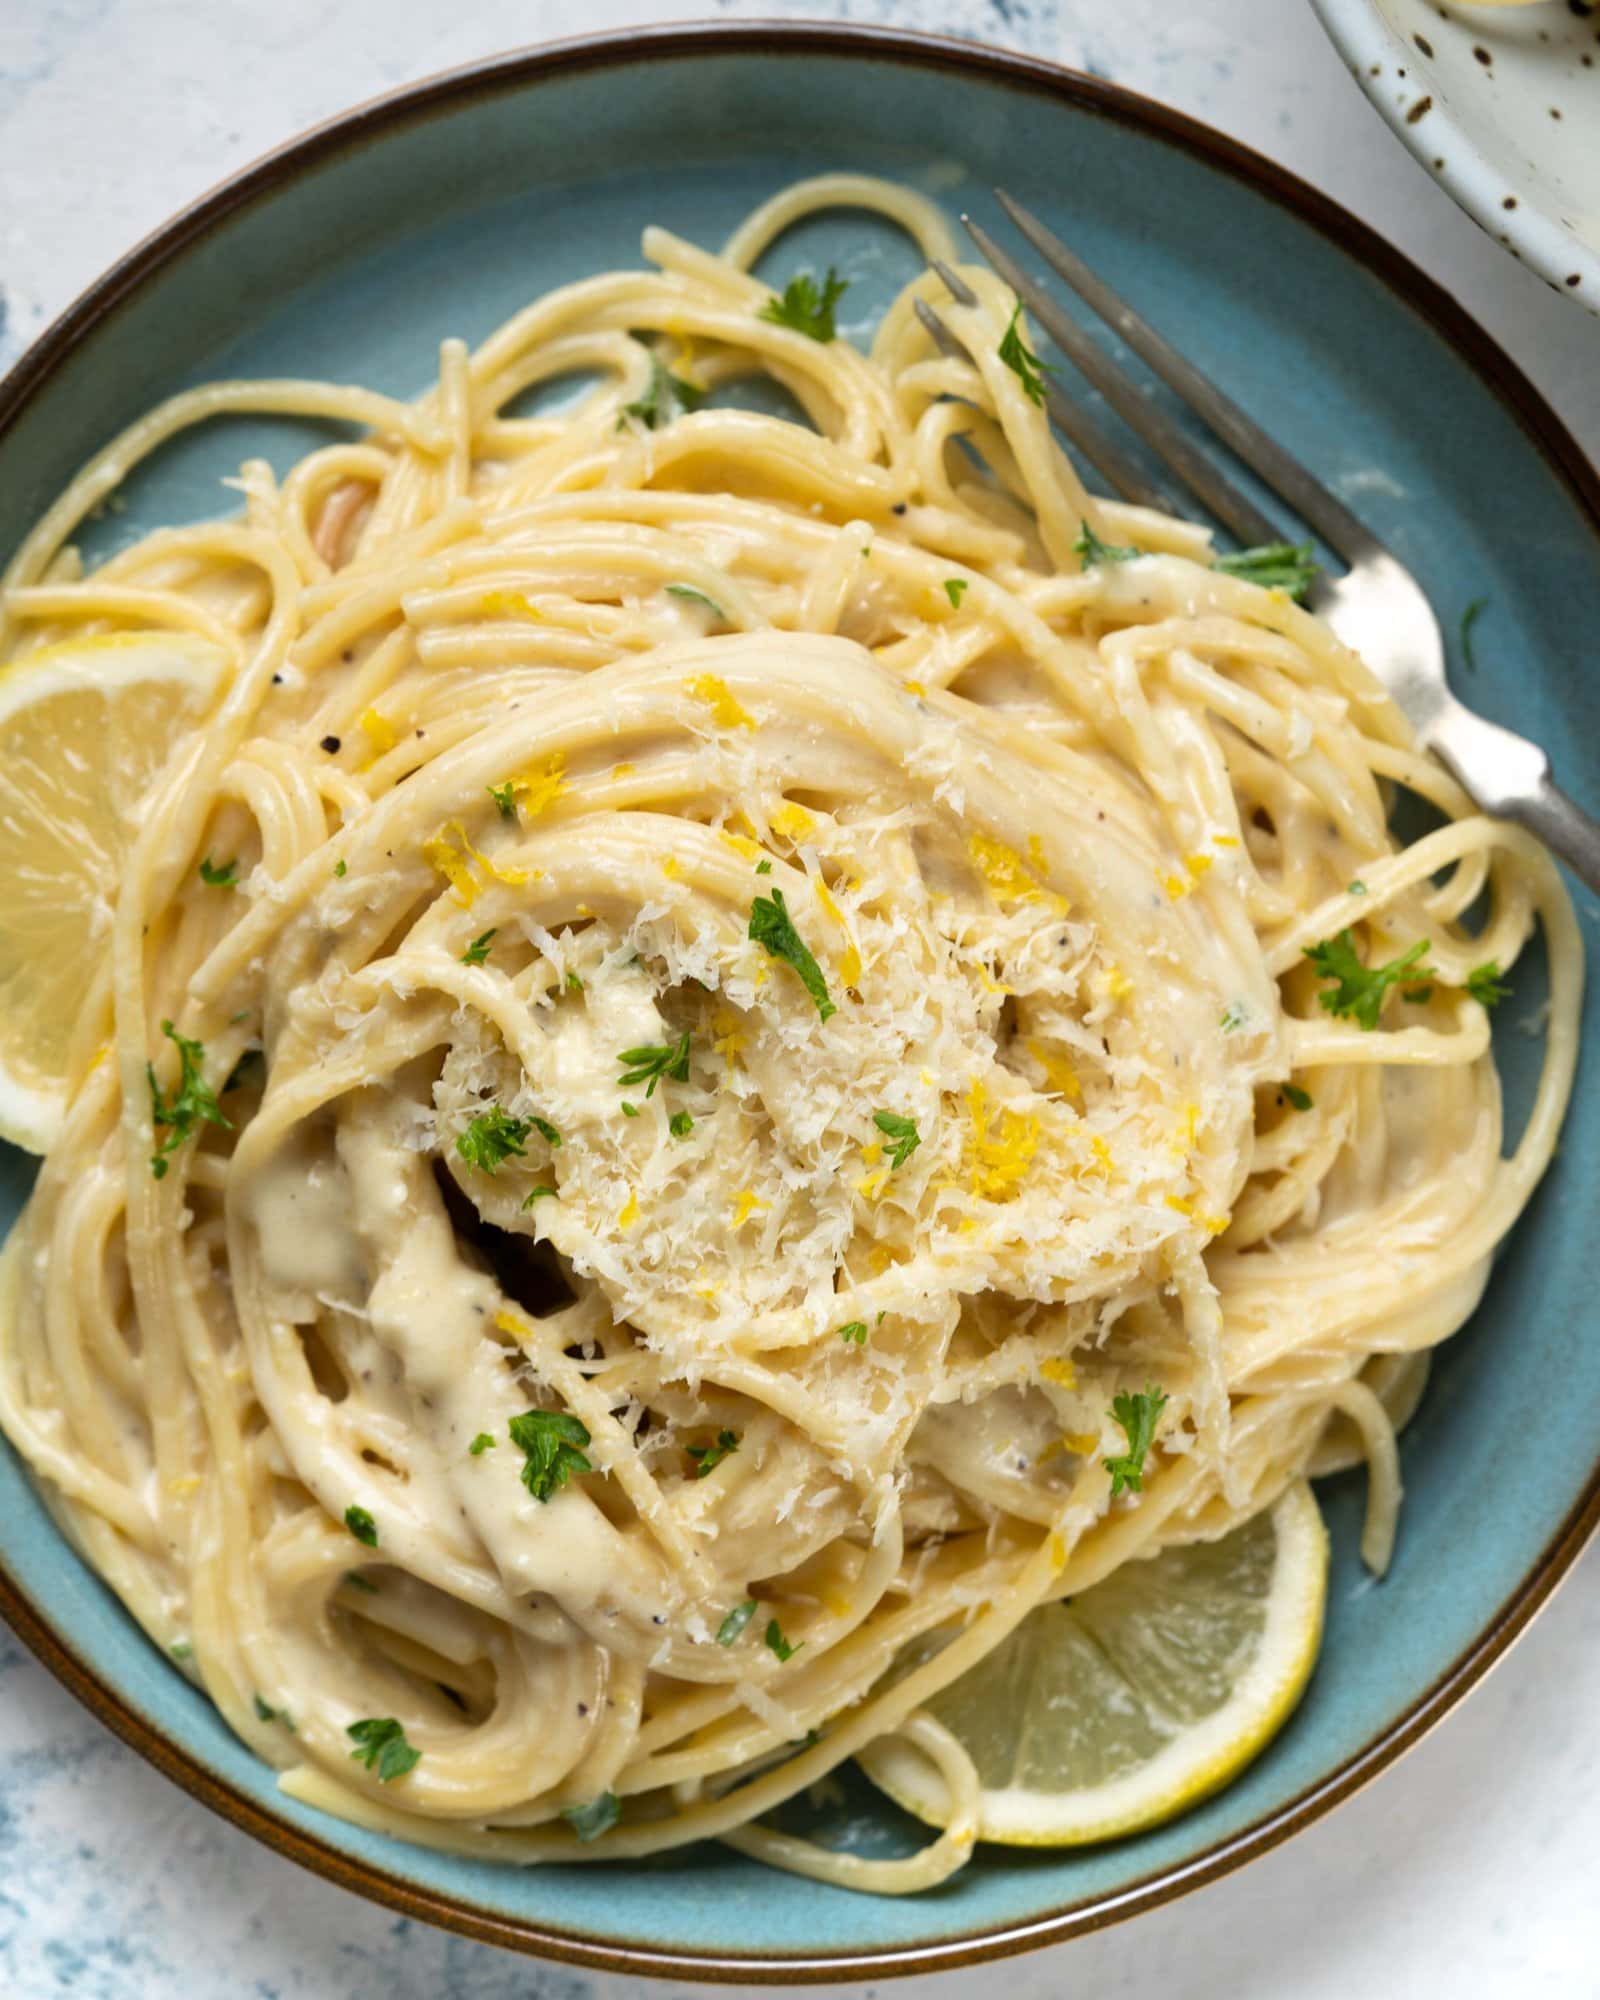 One-pot lemon pasta served on a blue plate and grated parmesan sprinkled on it.